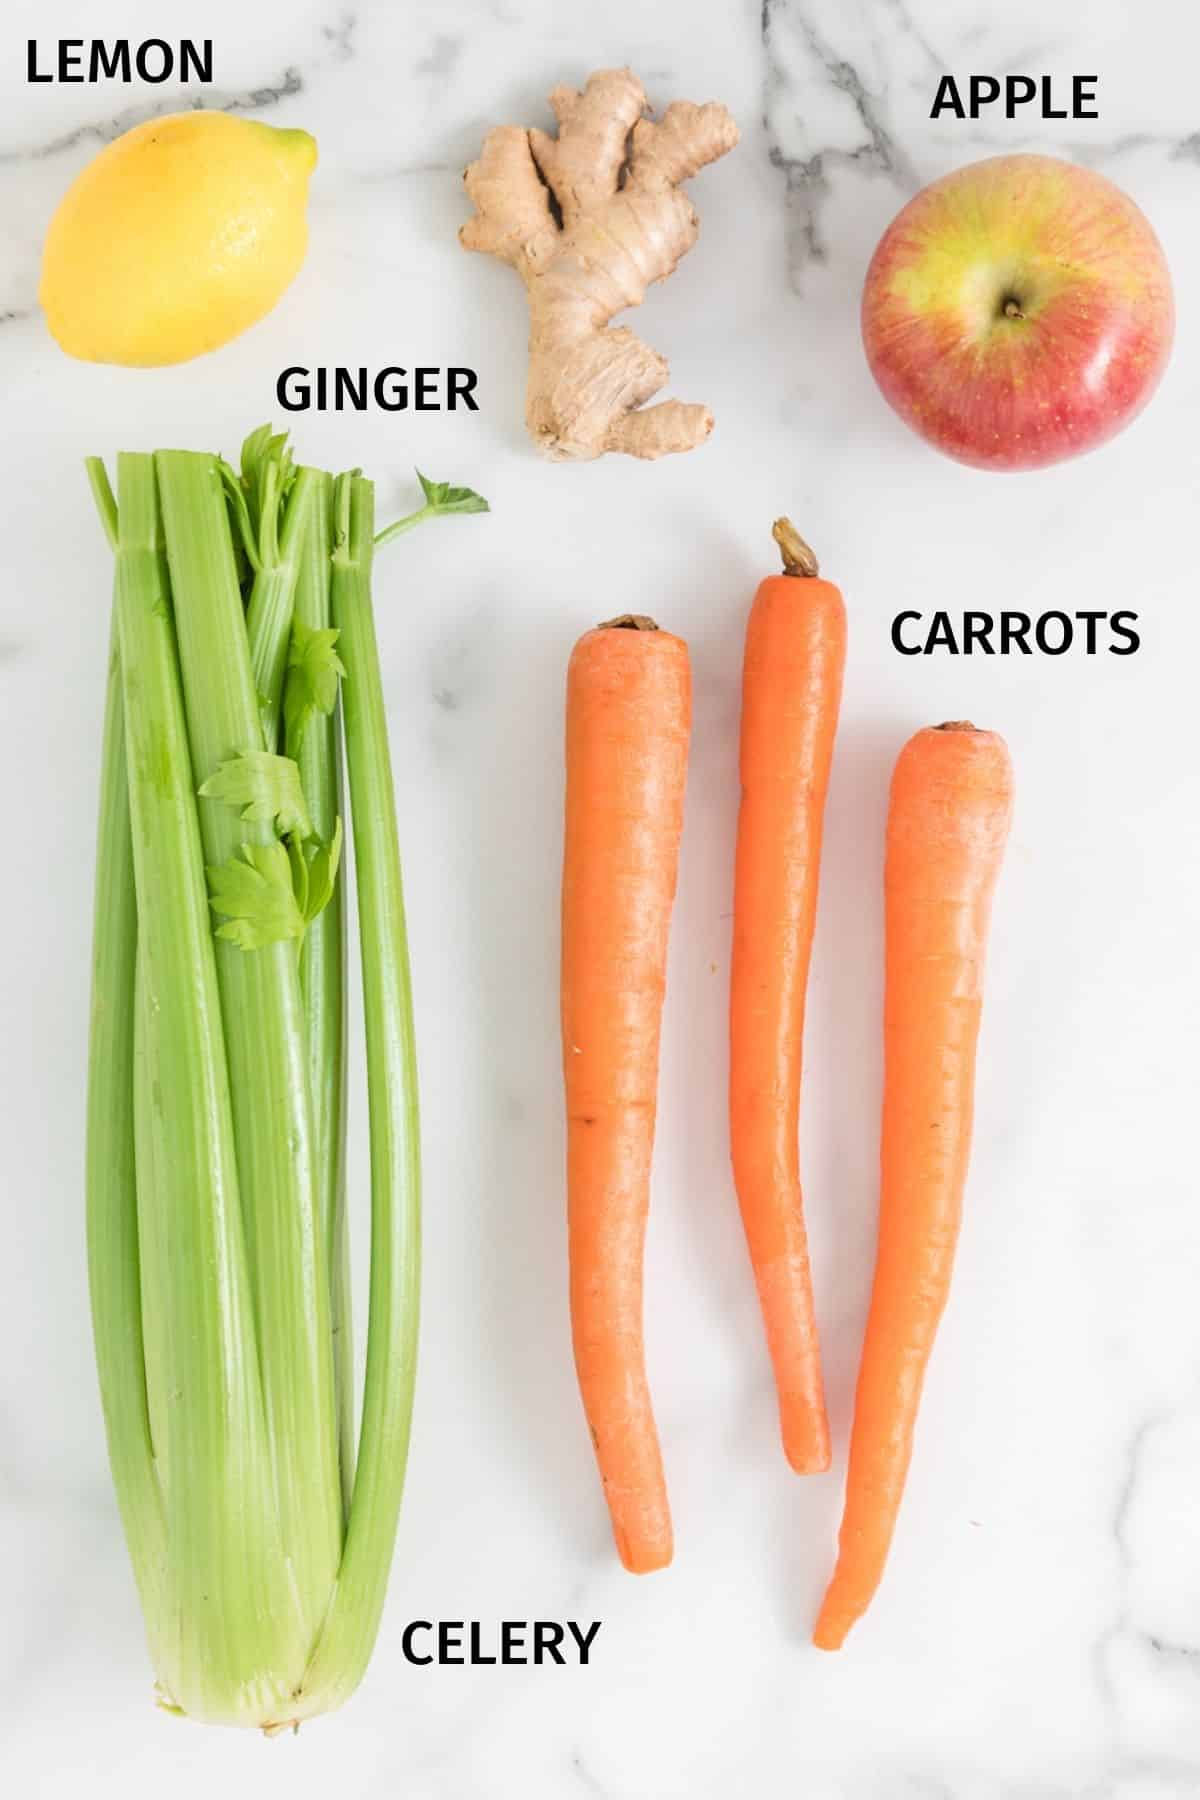 Ingredients for making carrot celery juice on a white surface.